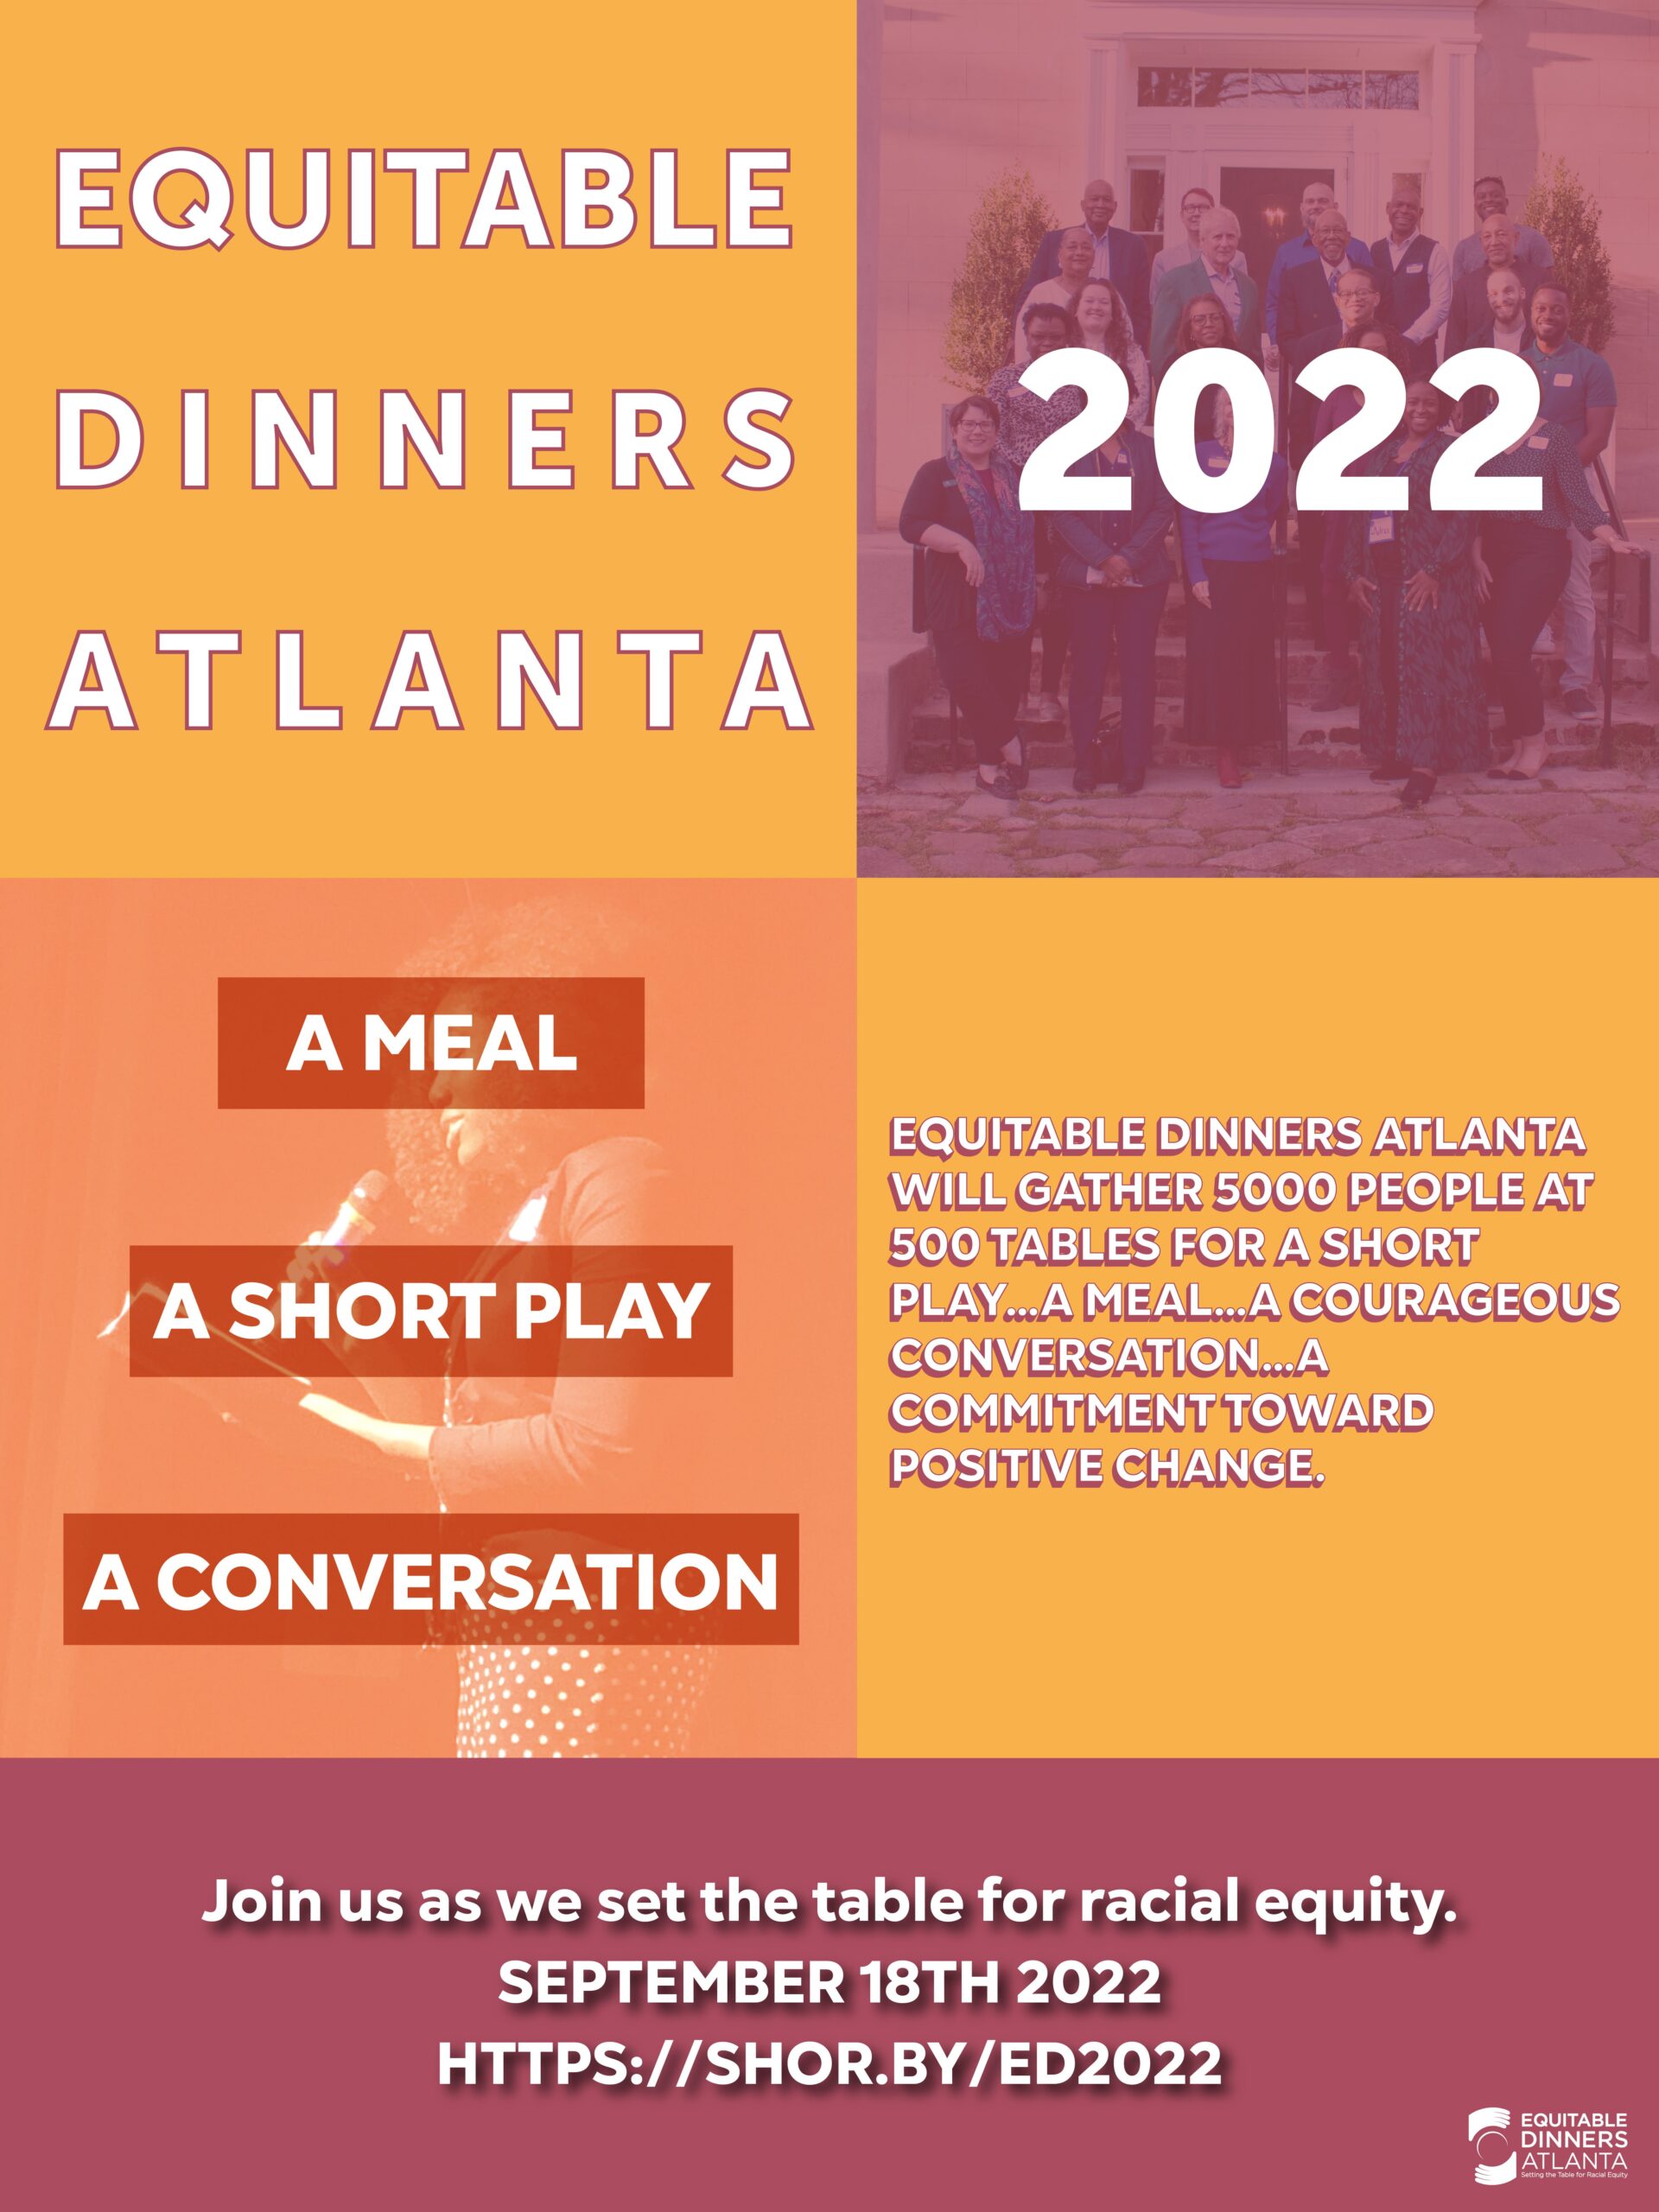 Equitable Dinners Atlanta 2022. A meal, a short play, a conversation.